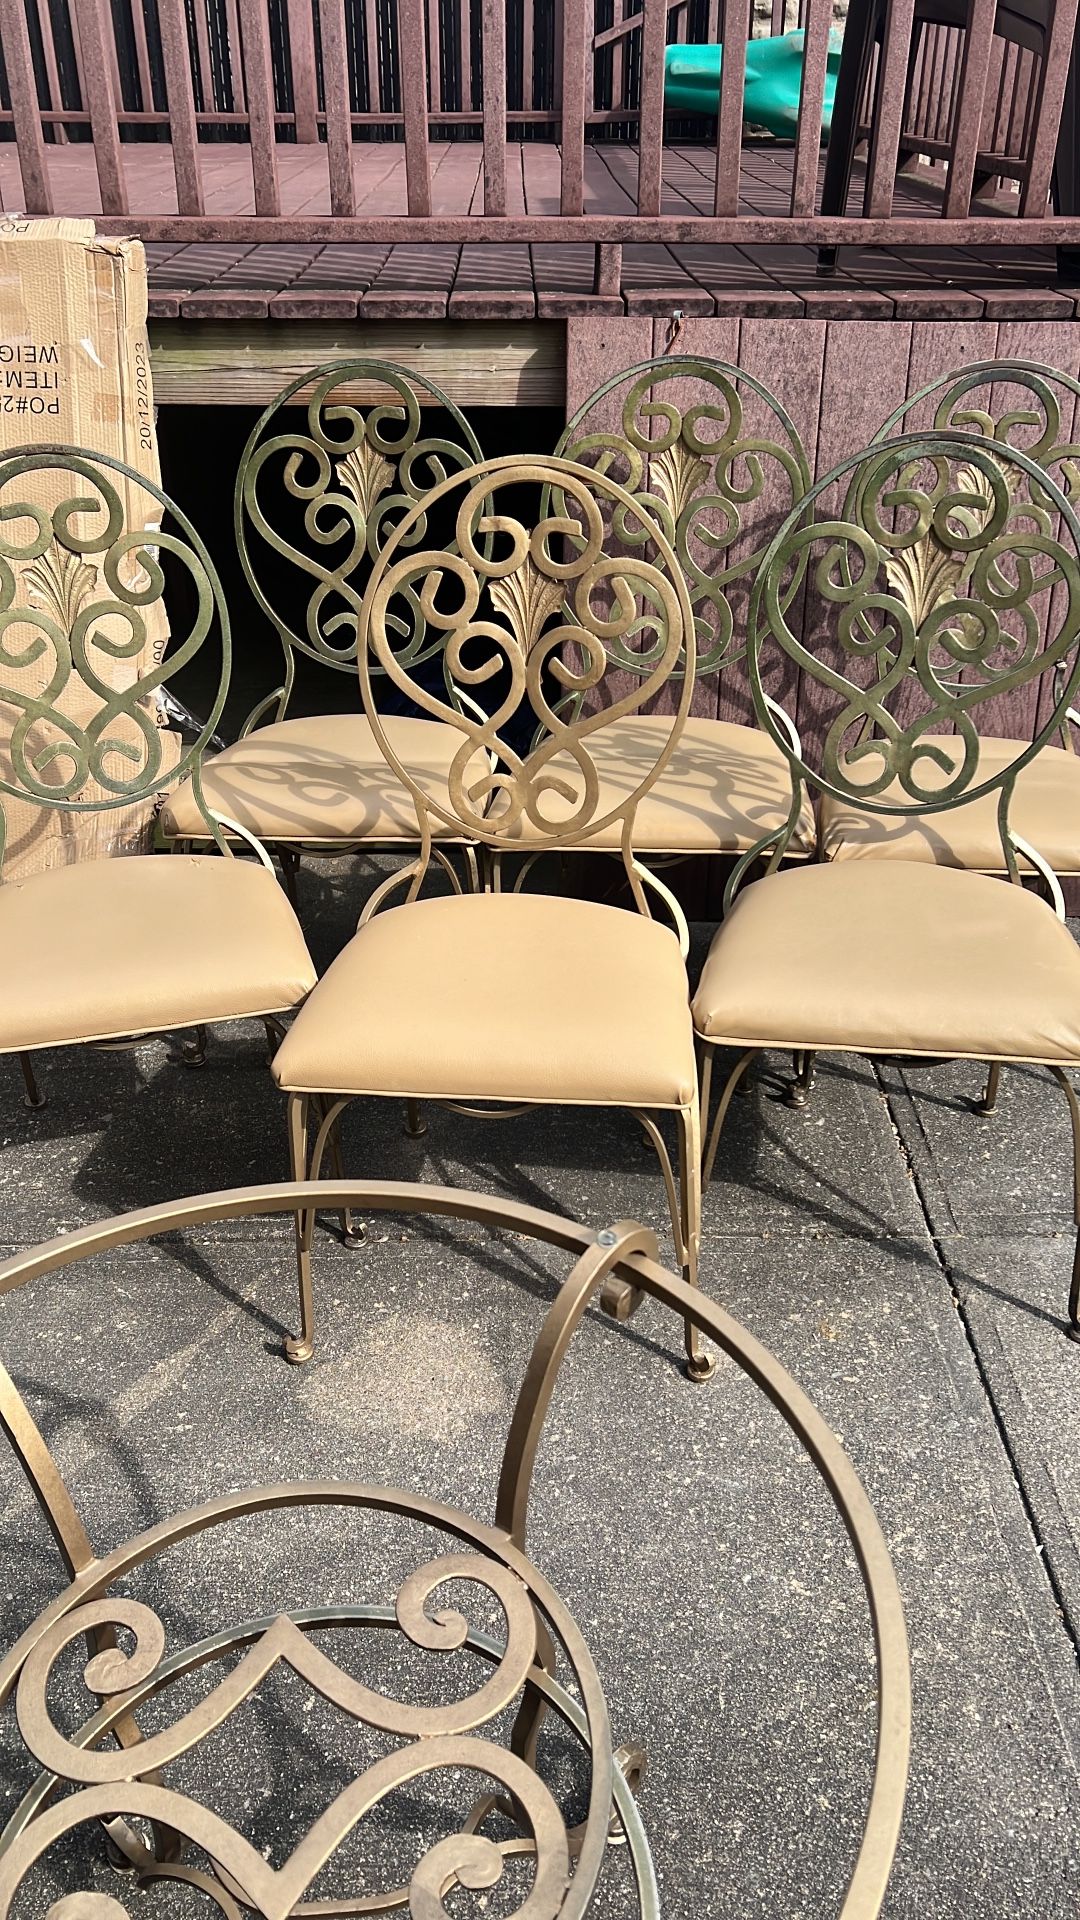 Wrought Iron Kitchen Table /6 Chairs